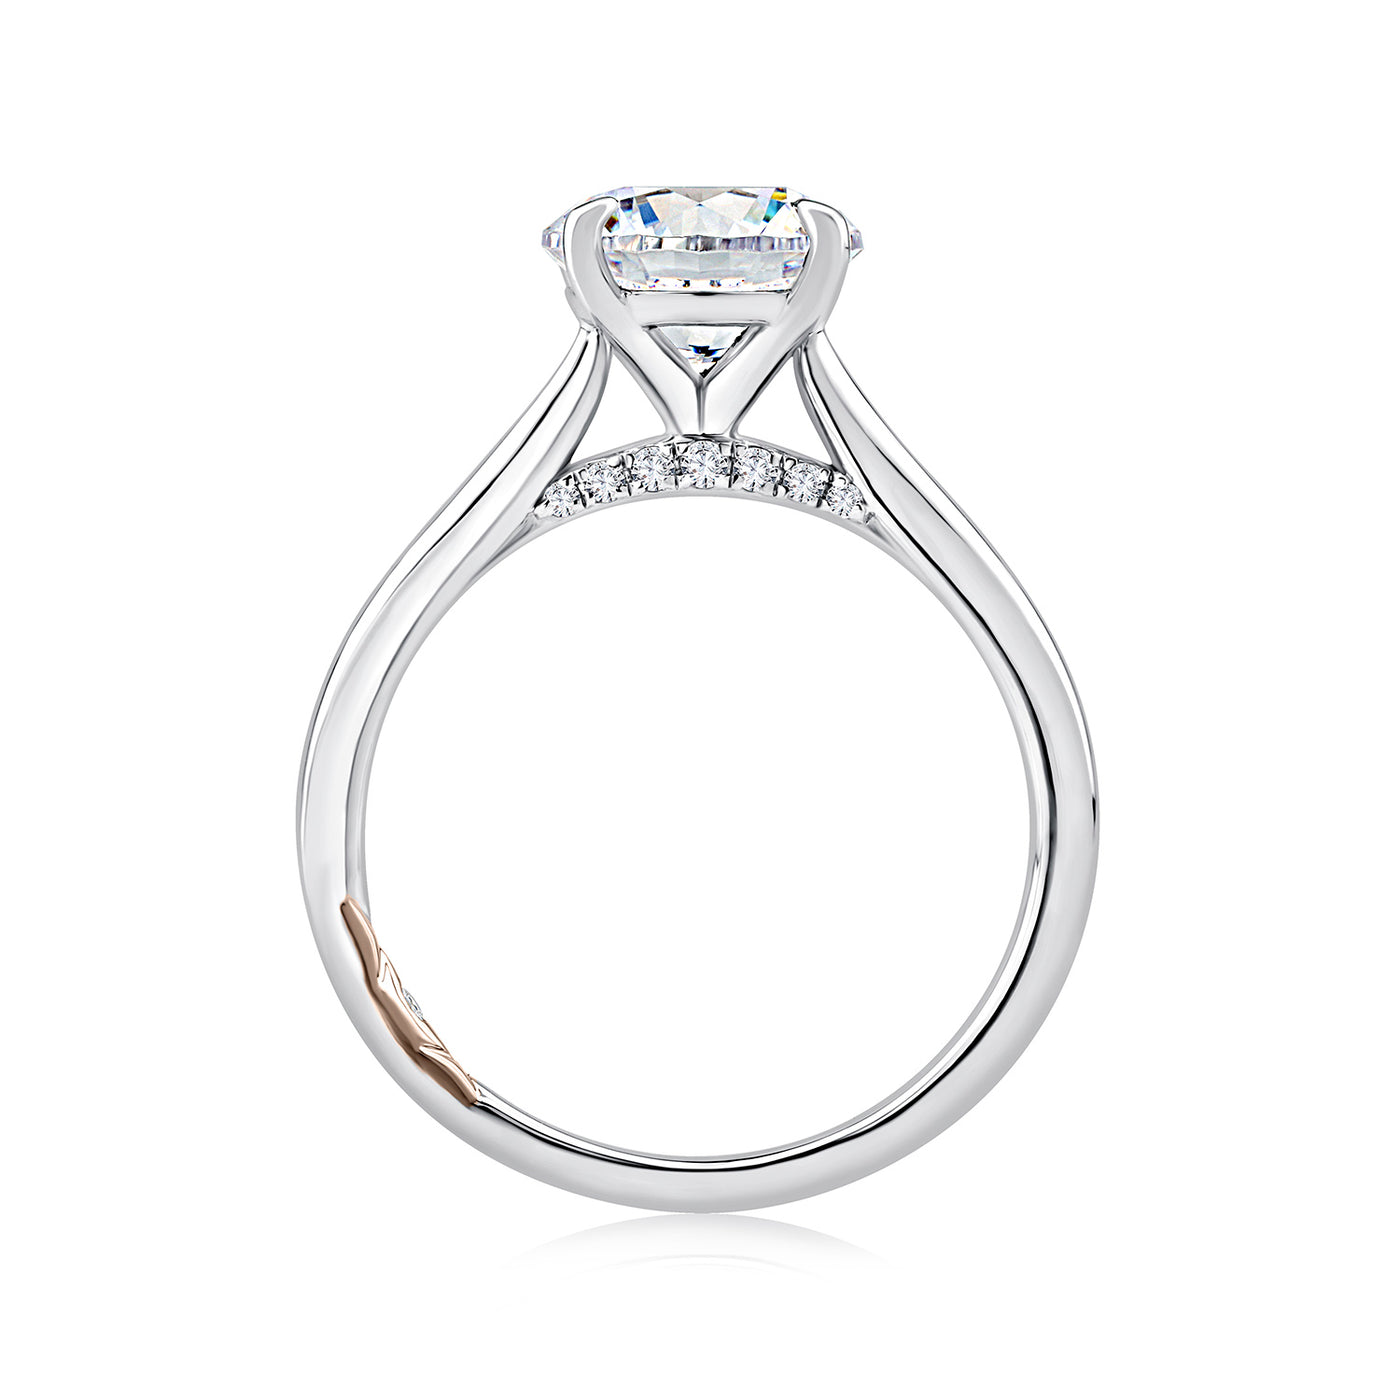 A.Jaffe 14k White Gold Round Solitaire Diamond Semi-Mount Engagement Ring – MECRD2543/158